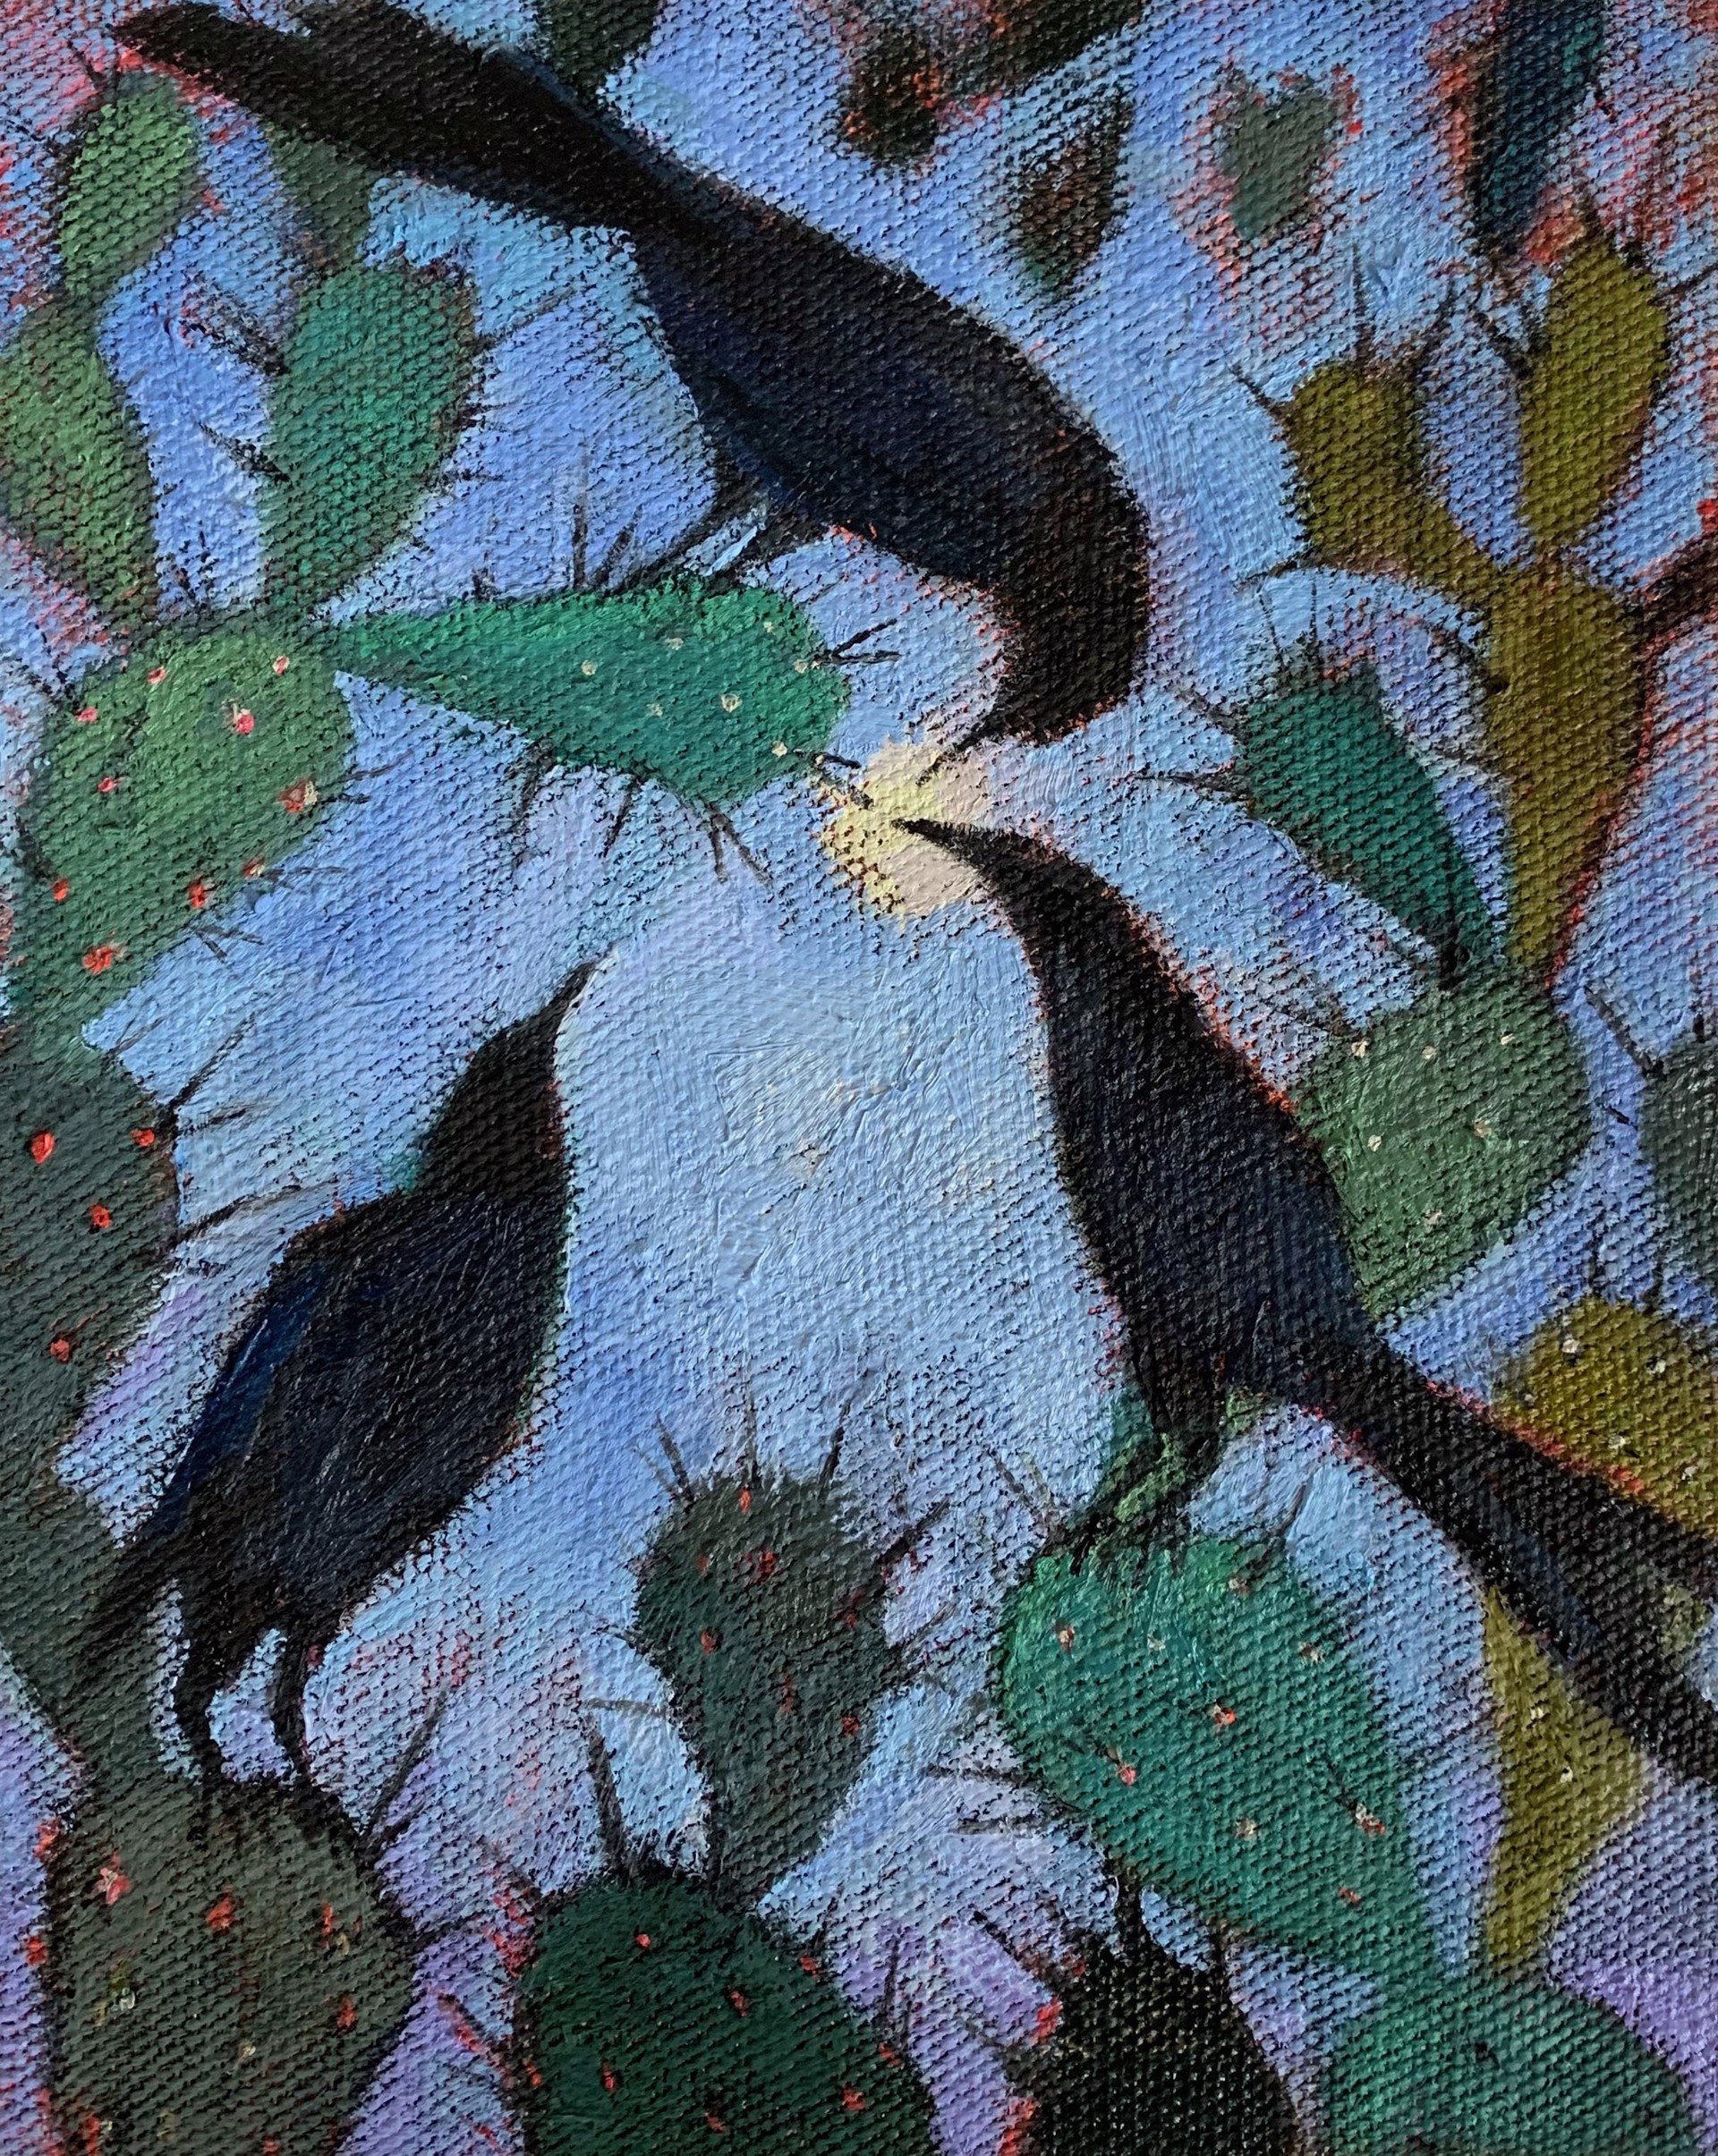 Grackle Afternoon by Sirena LaBurn